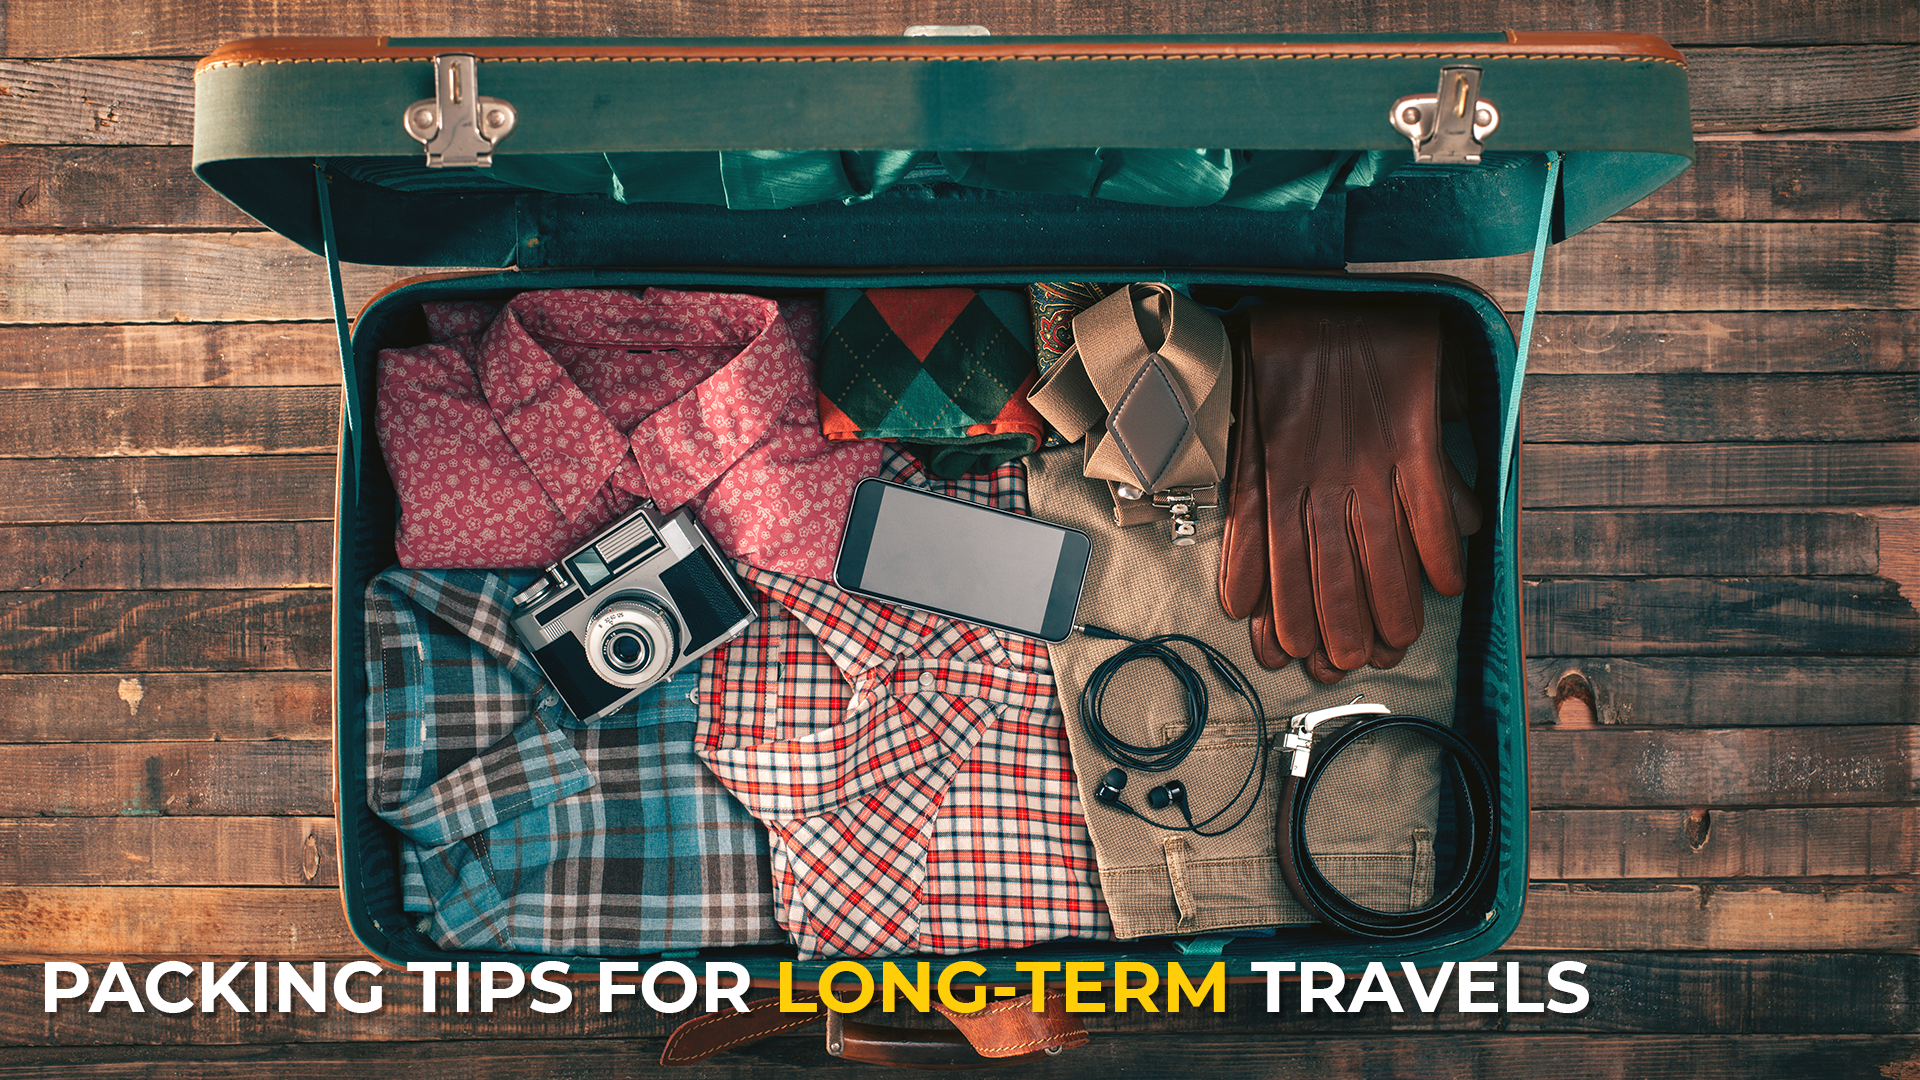 Packing Tips for Long-Term Travels